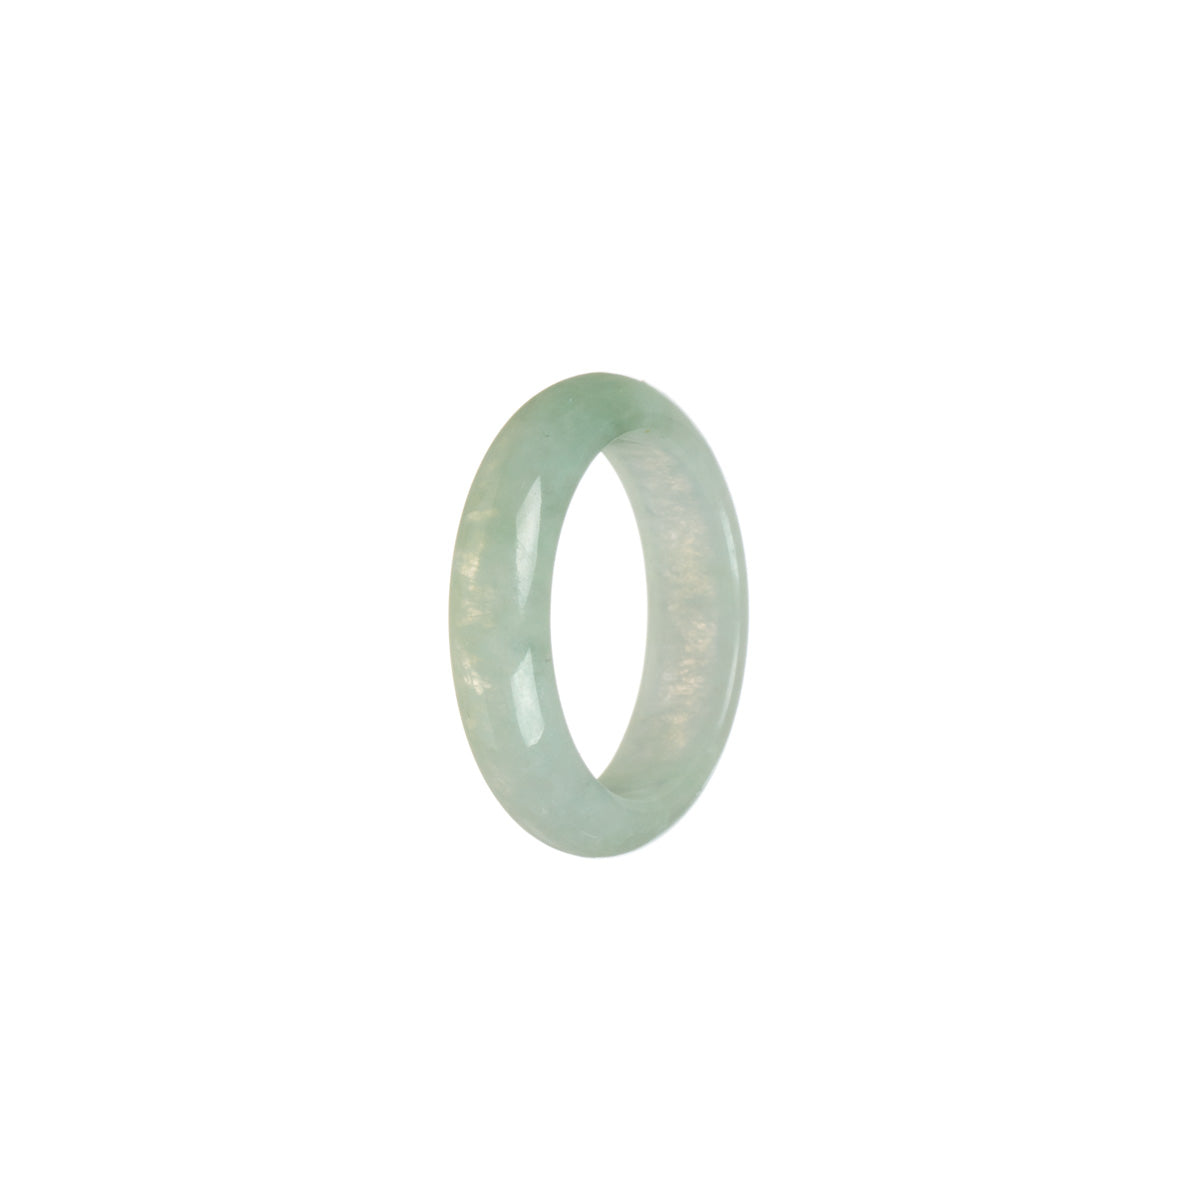 Real White with light green Jadeite Jade Band - Size S 1/2